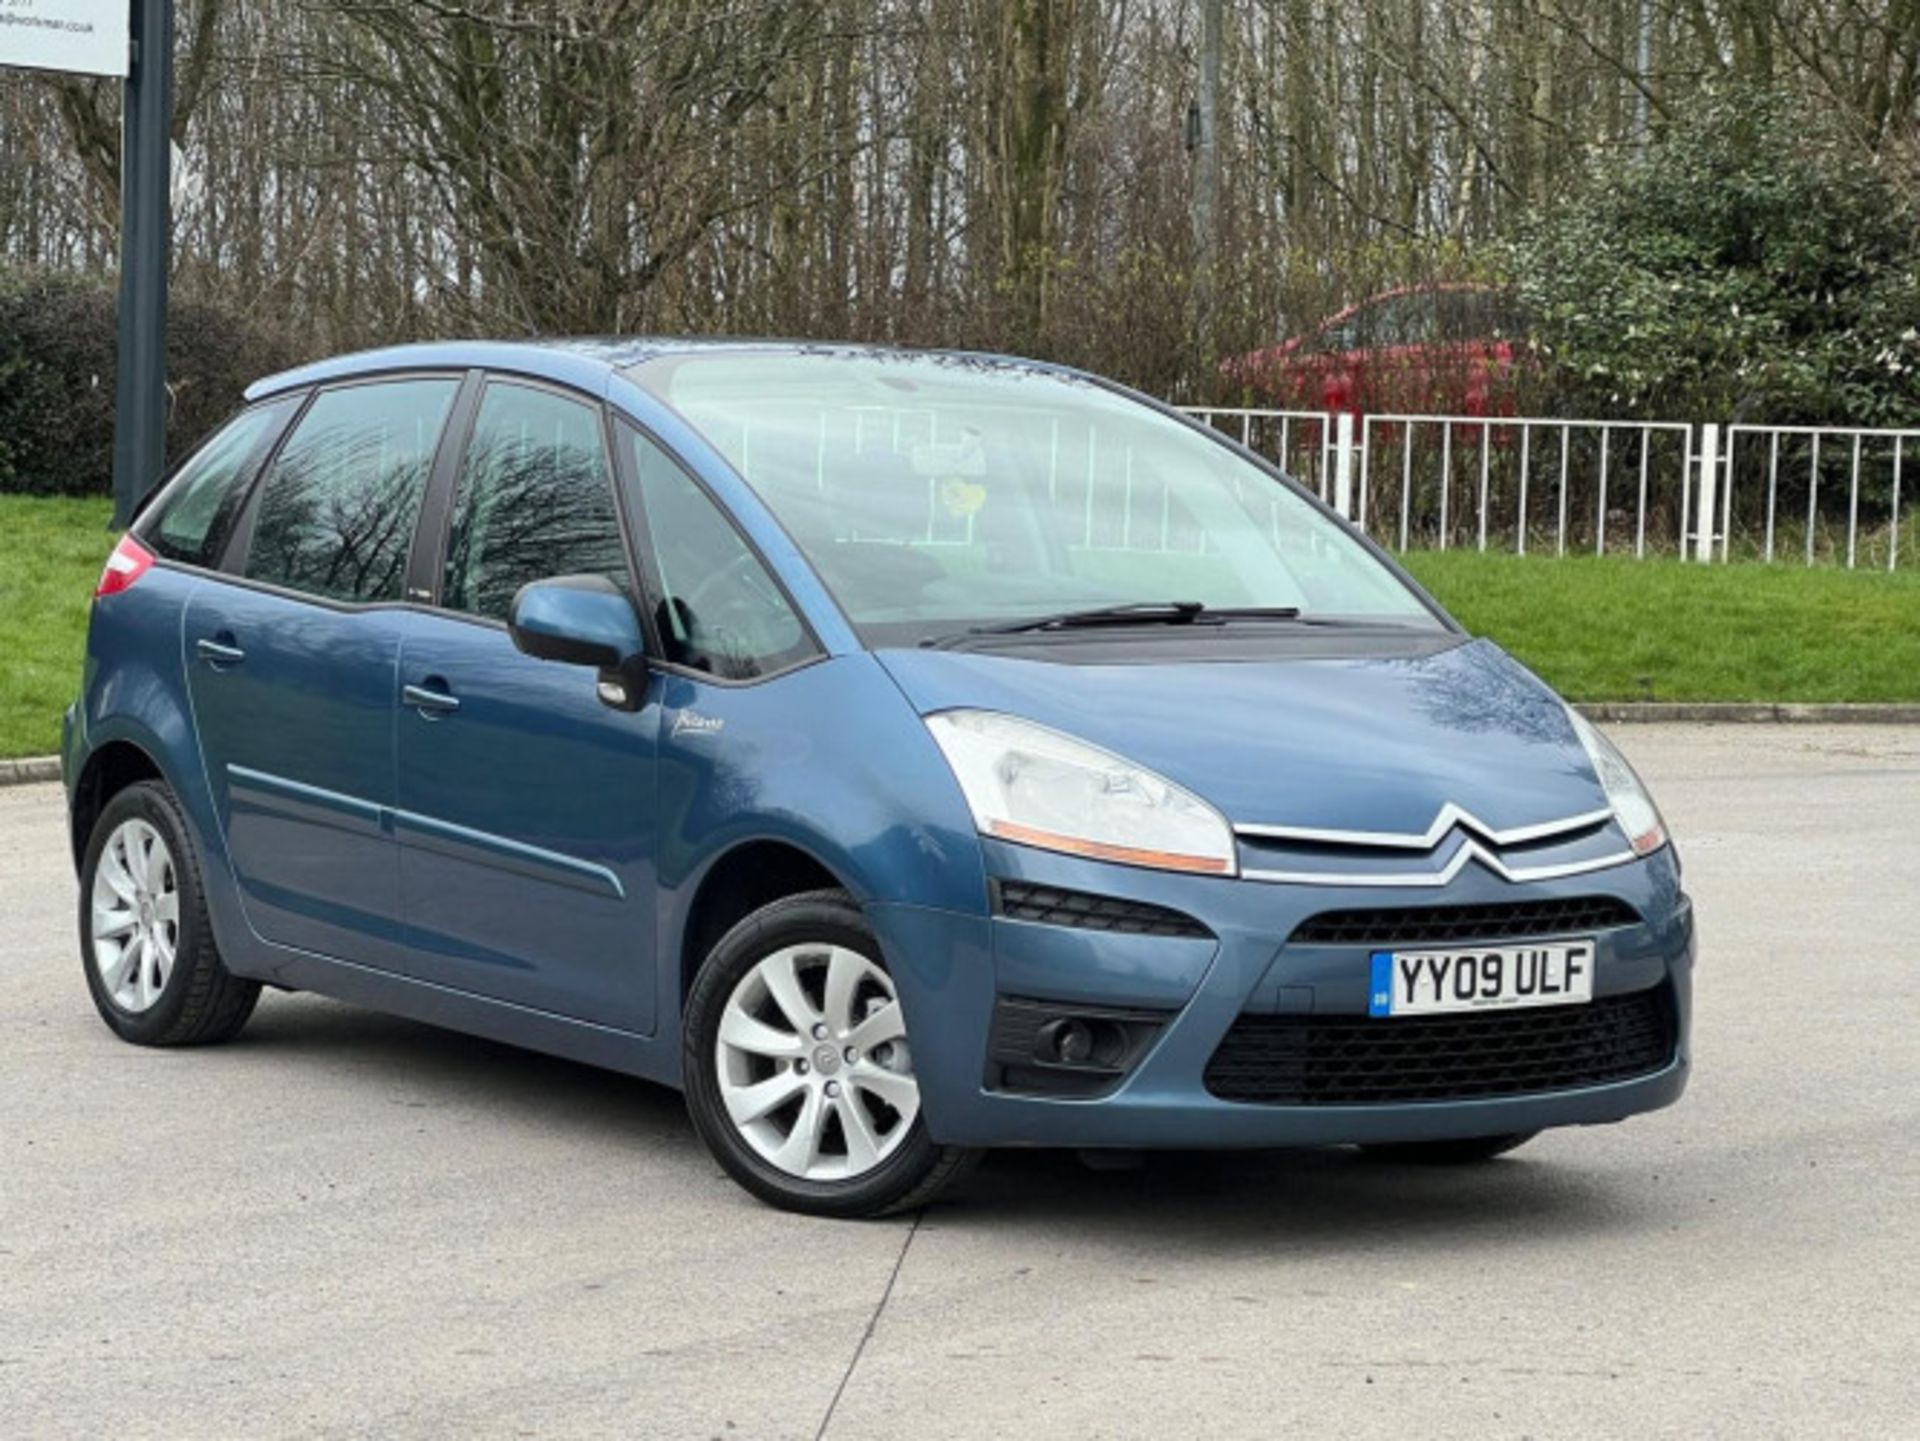 2009 CITROEN C4 PICASSO 1.6 HDI VTR+ EGS6 5DR >>--NO VAT ON HAMMER--<< - Image 120 of 123